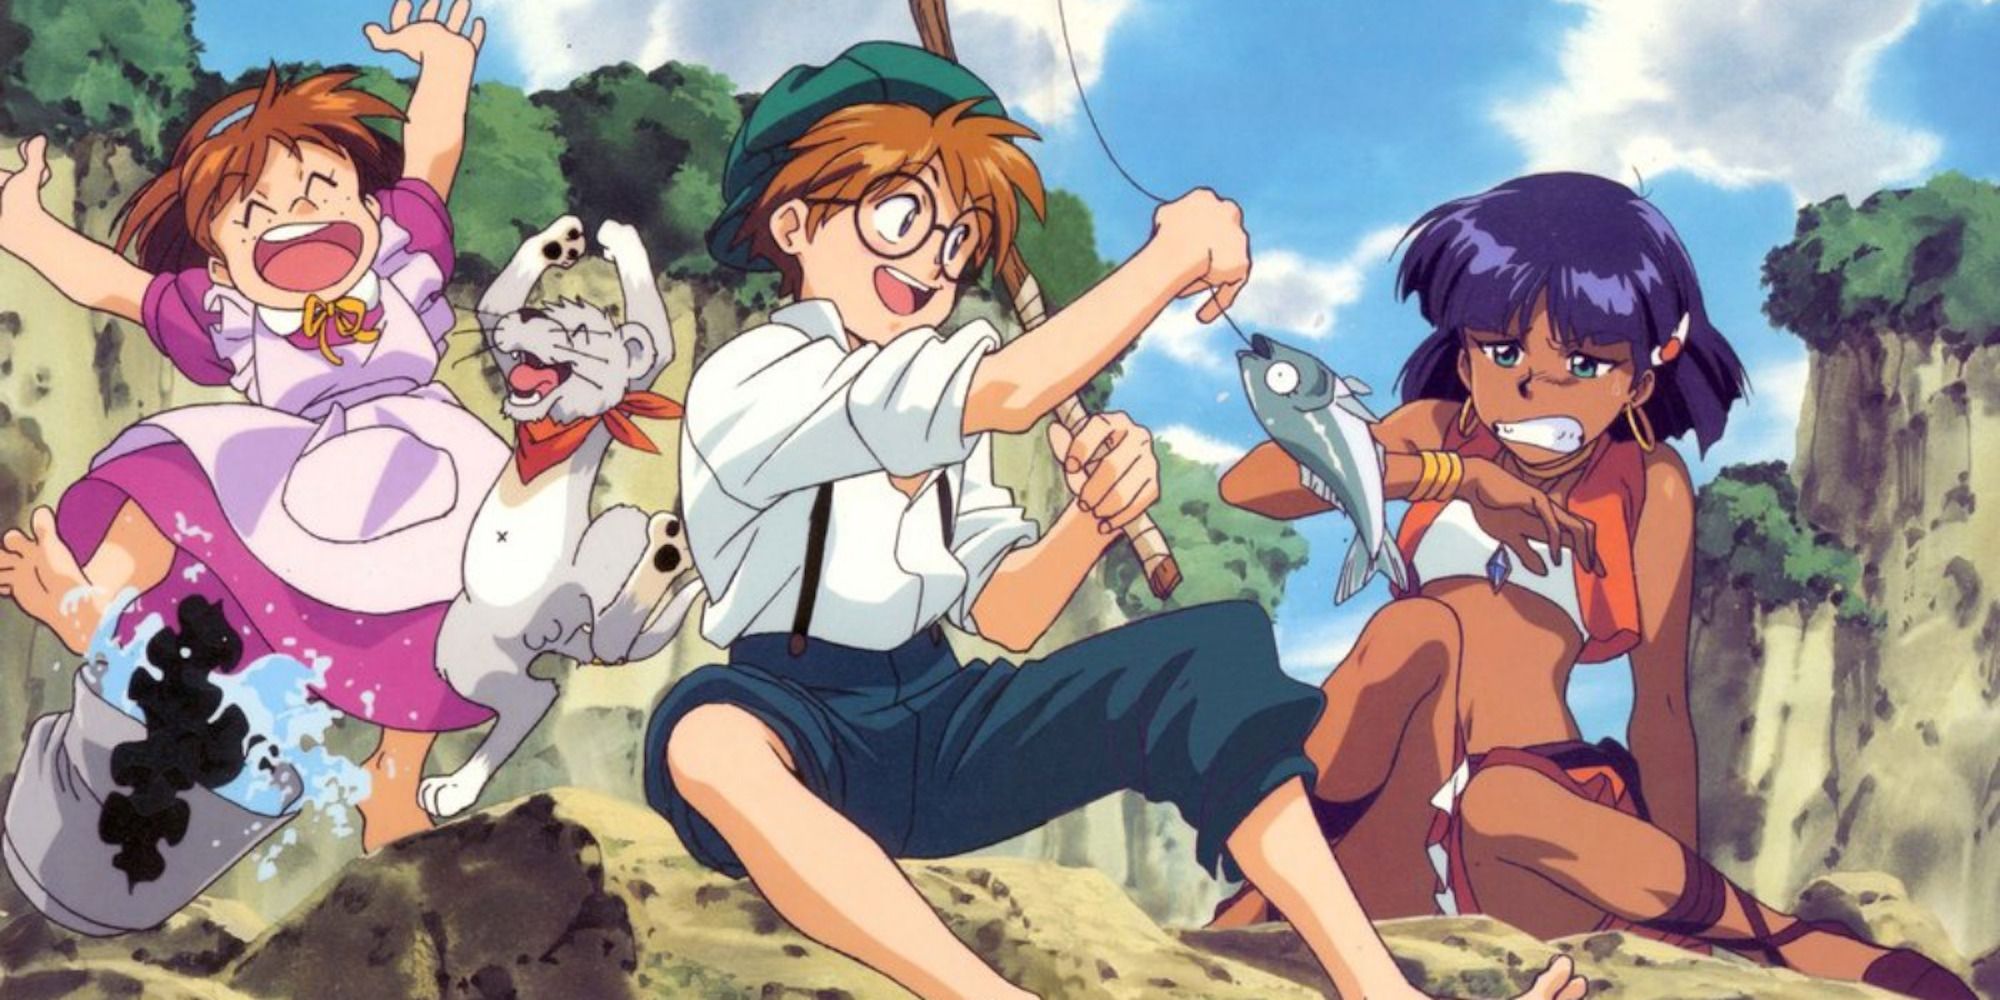 Promo art featuring characters from Nadia: The Secret Of Blue Water